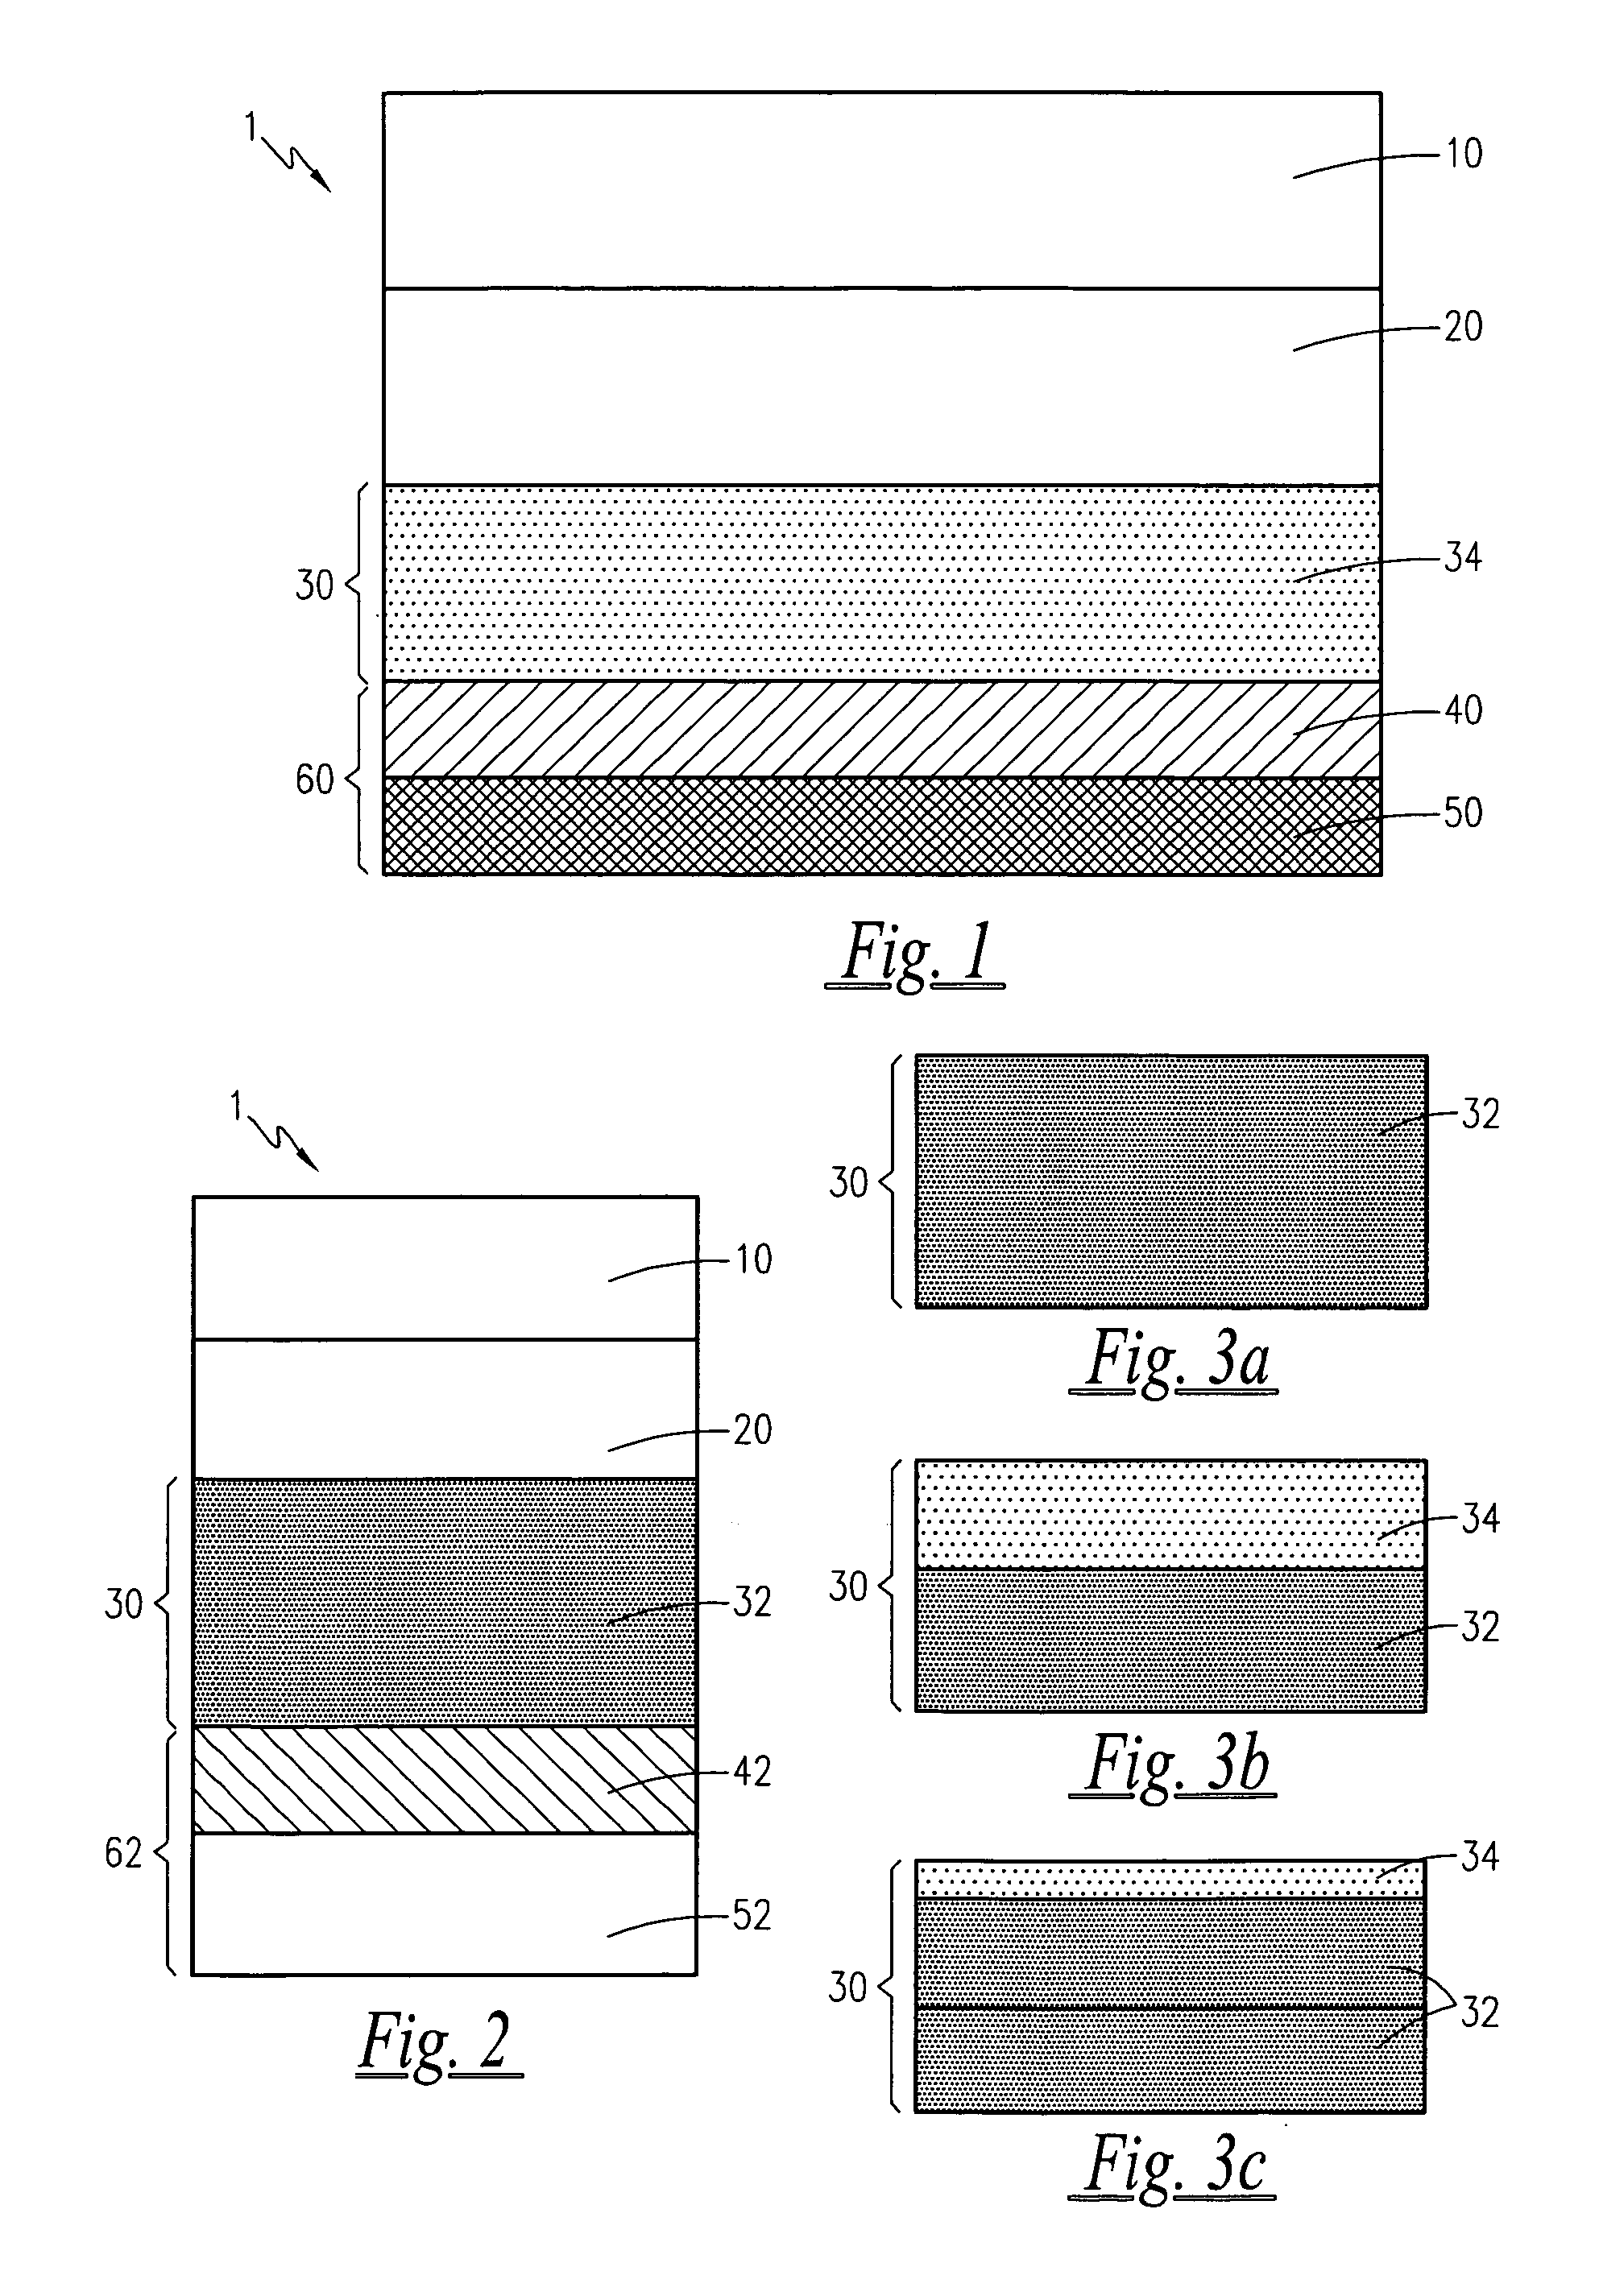 Back contact and back reflector for thin film silicon solar cells